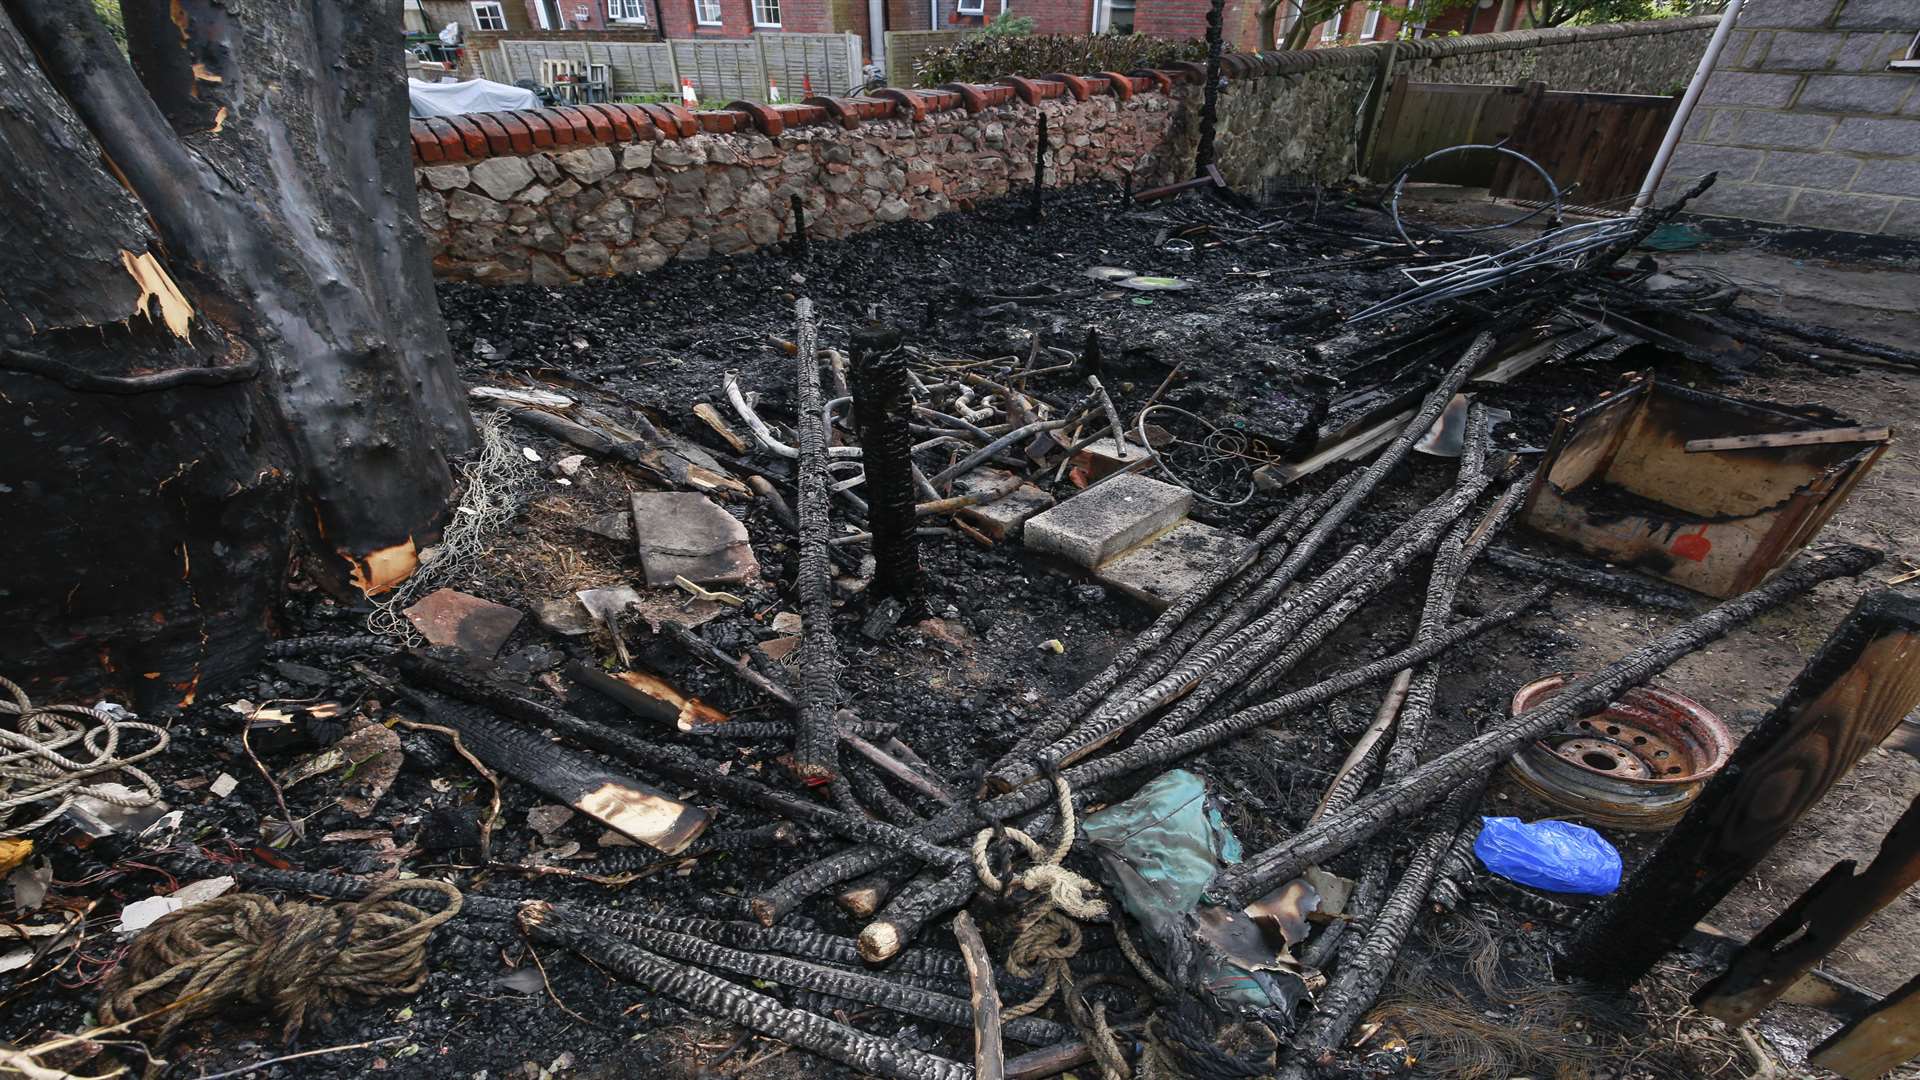 The fire destroyed the toy shed. Picture: Martin Apps